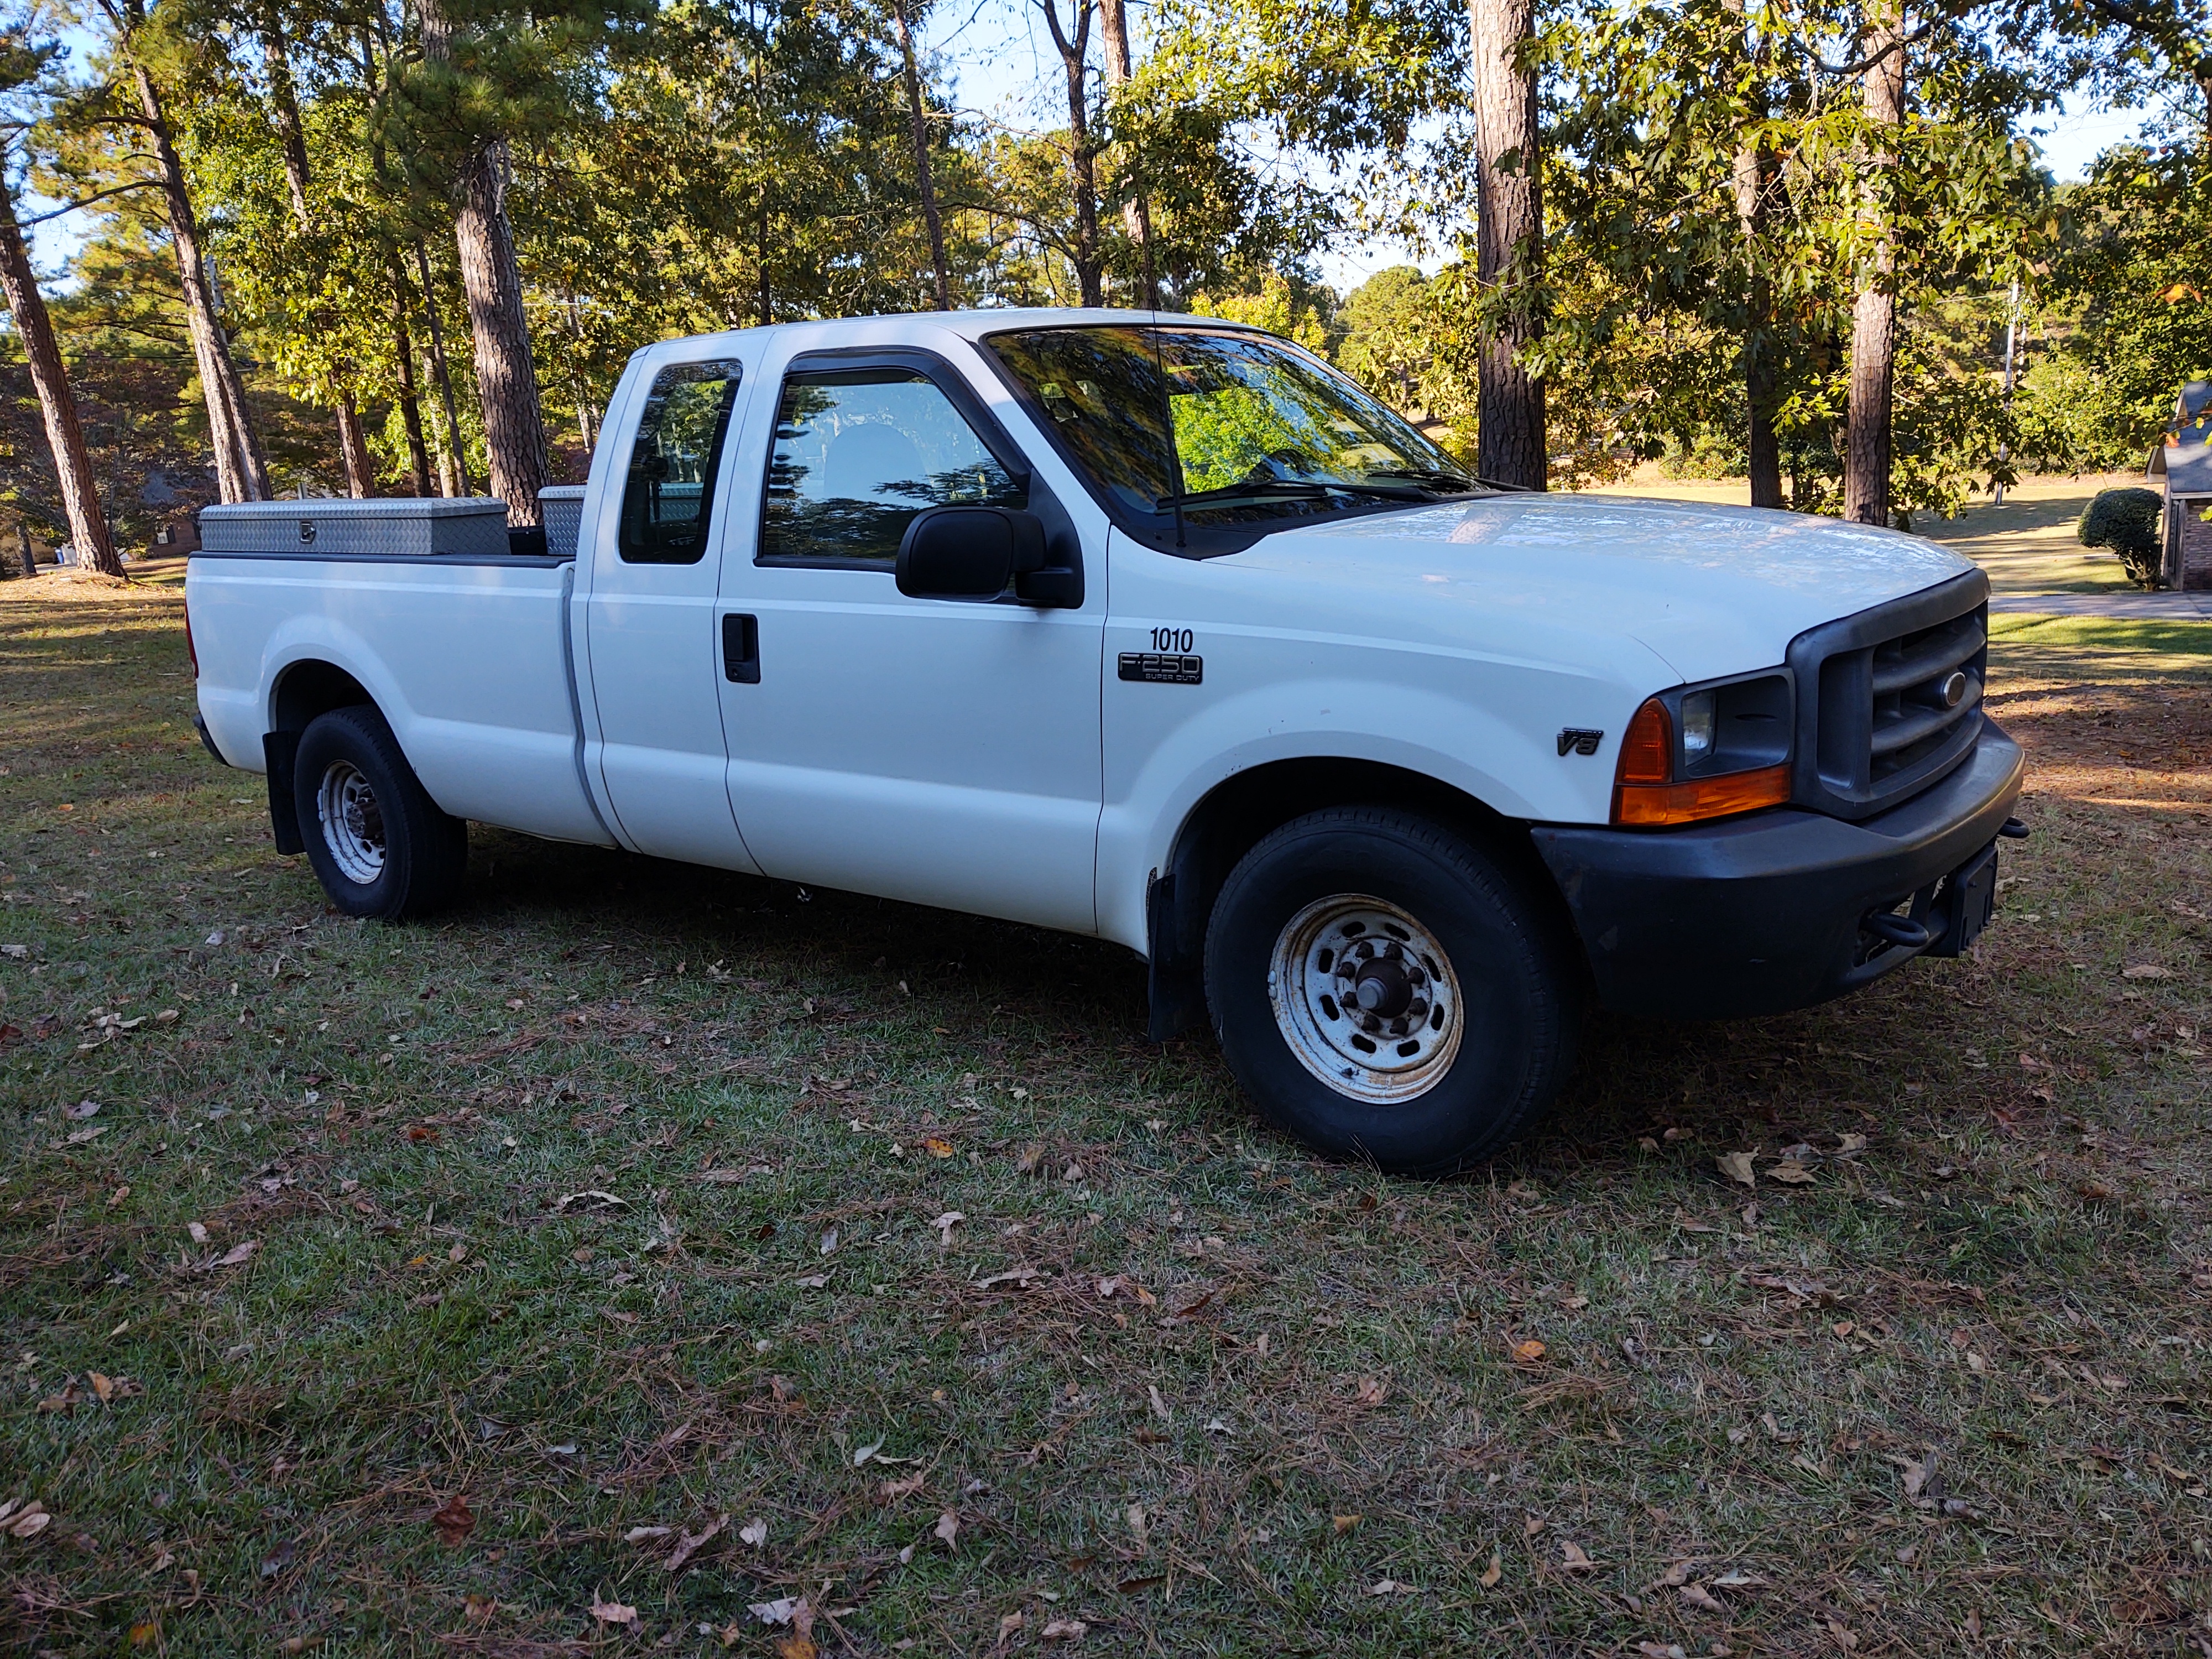 F-250 Supercab right front.